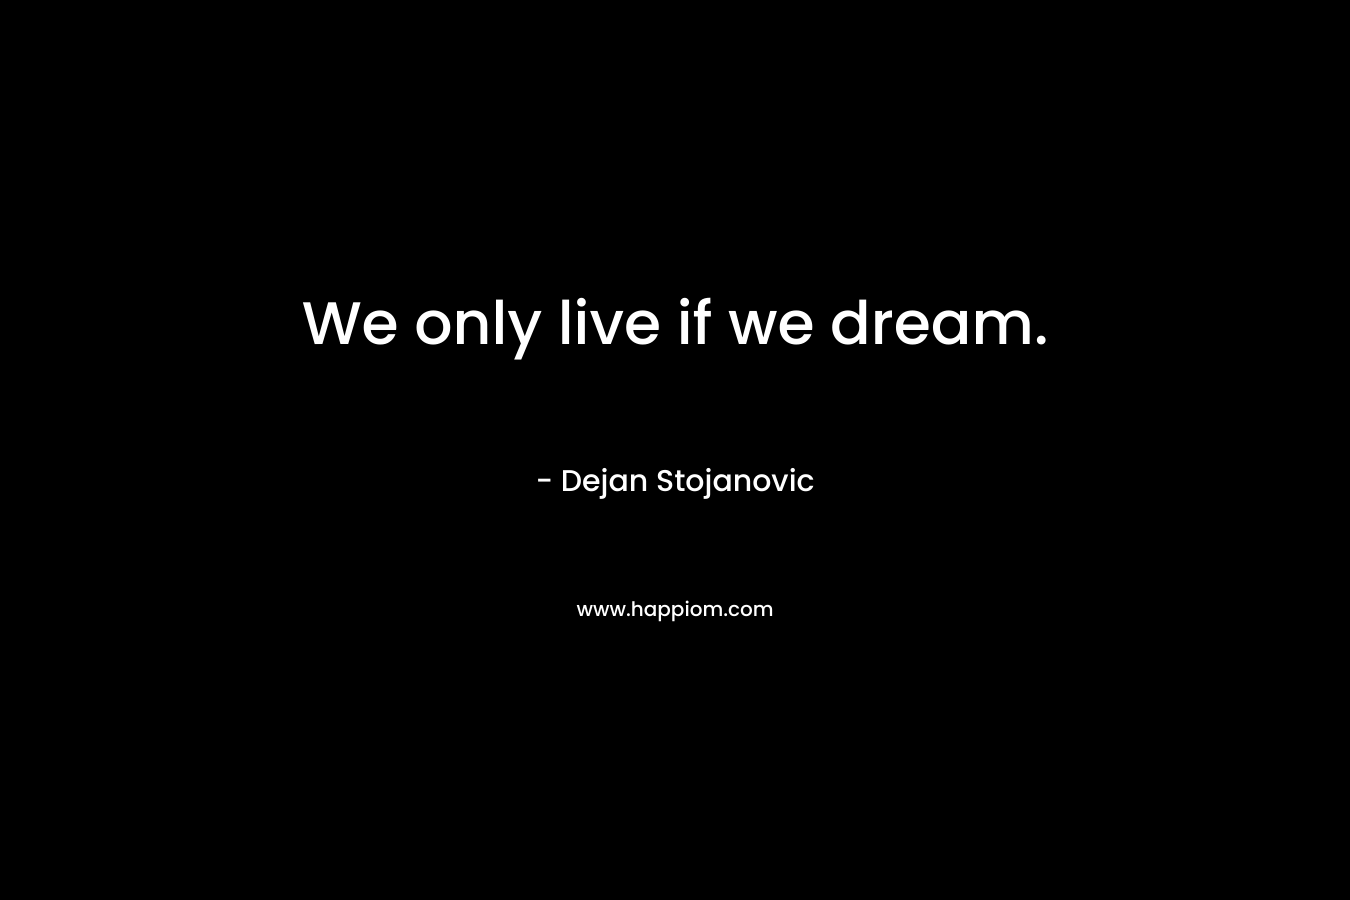 We only live if we dream.